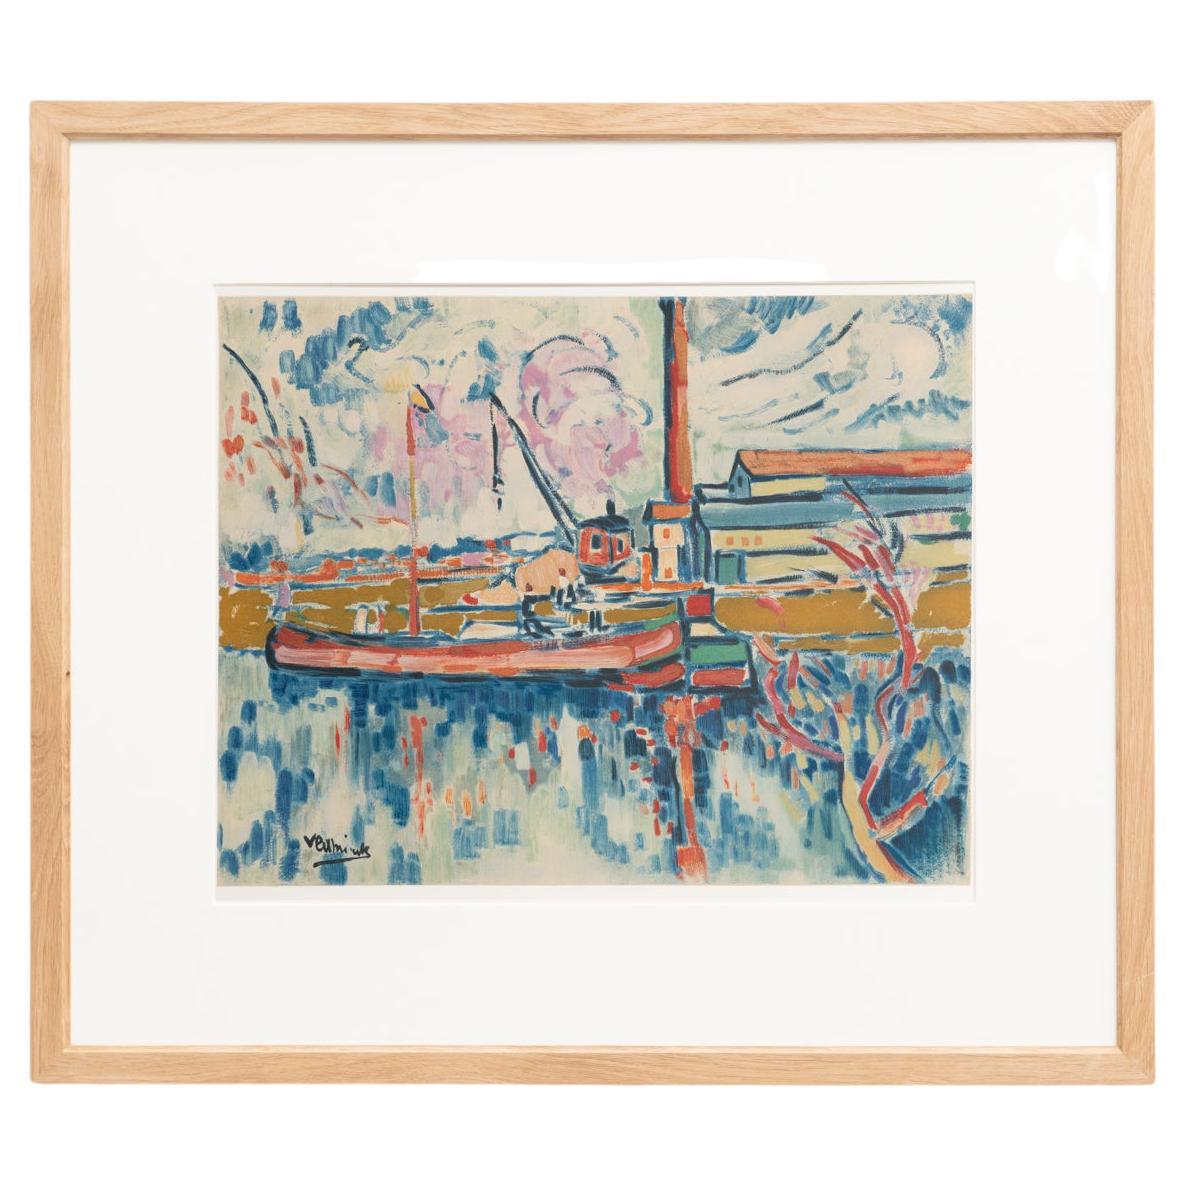 Vlamnick Framed 'Siene a Chatou' Color Lithography, circa 1972 For Sale